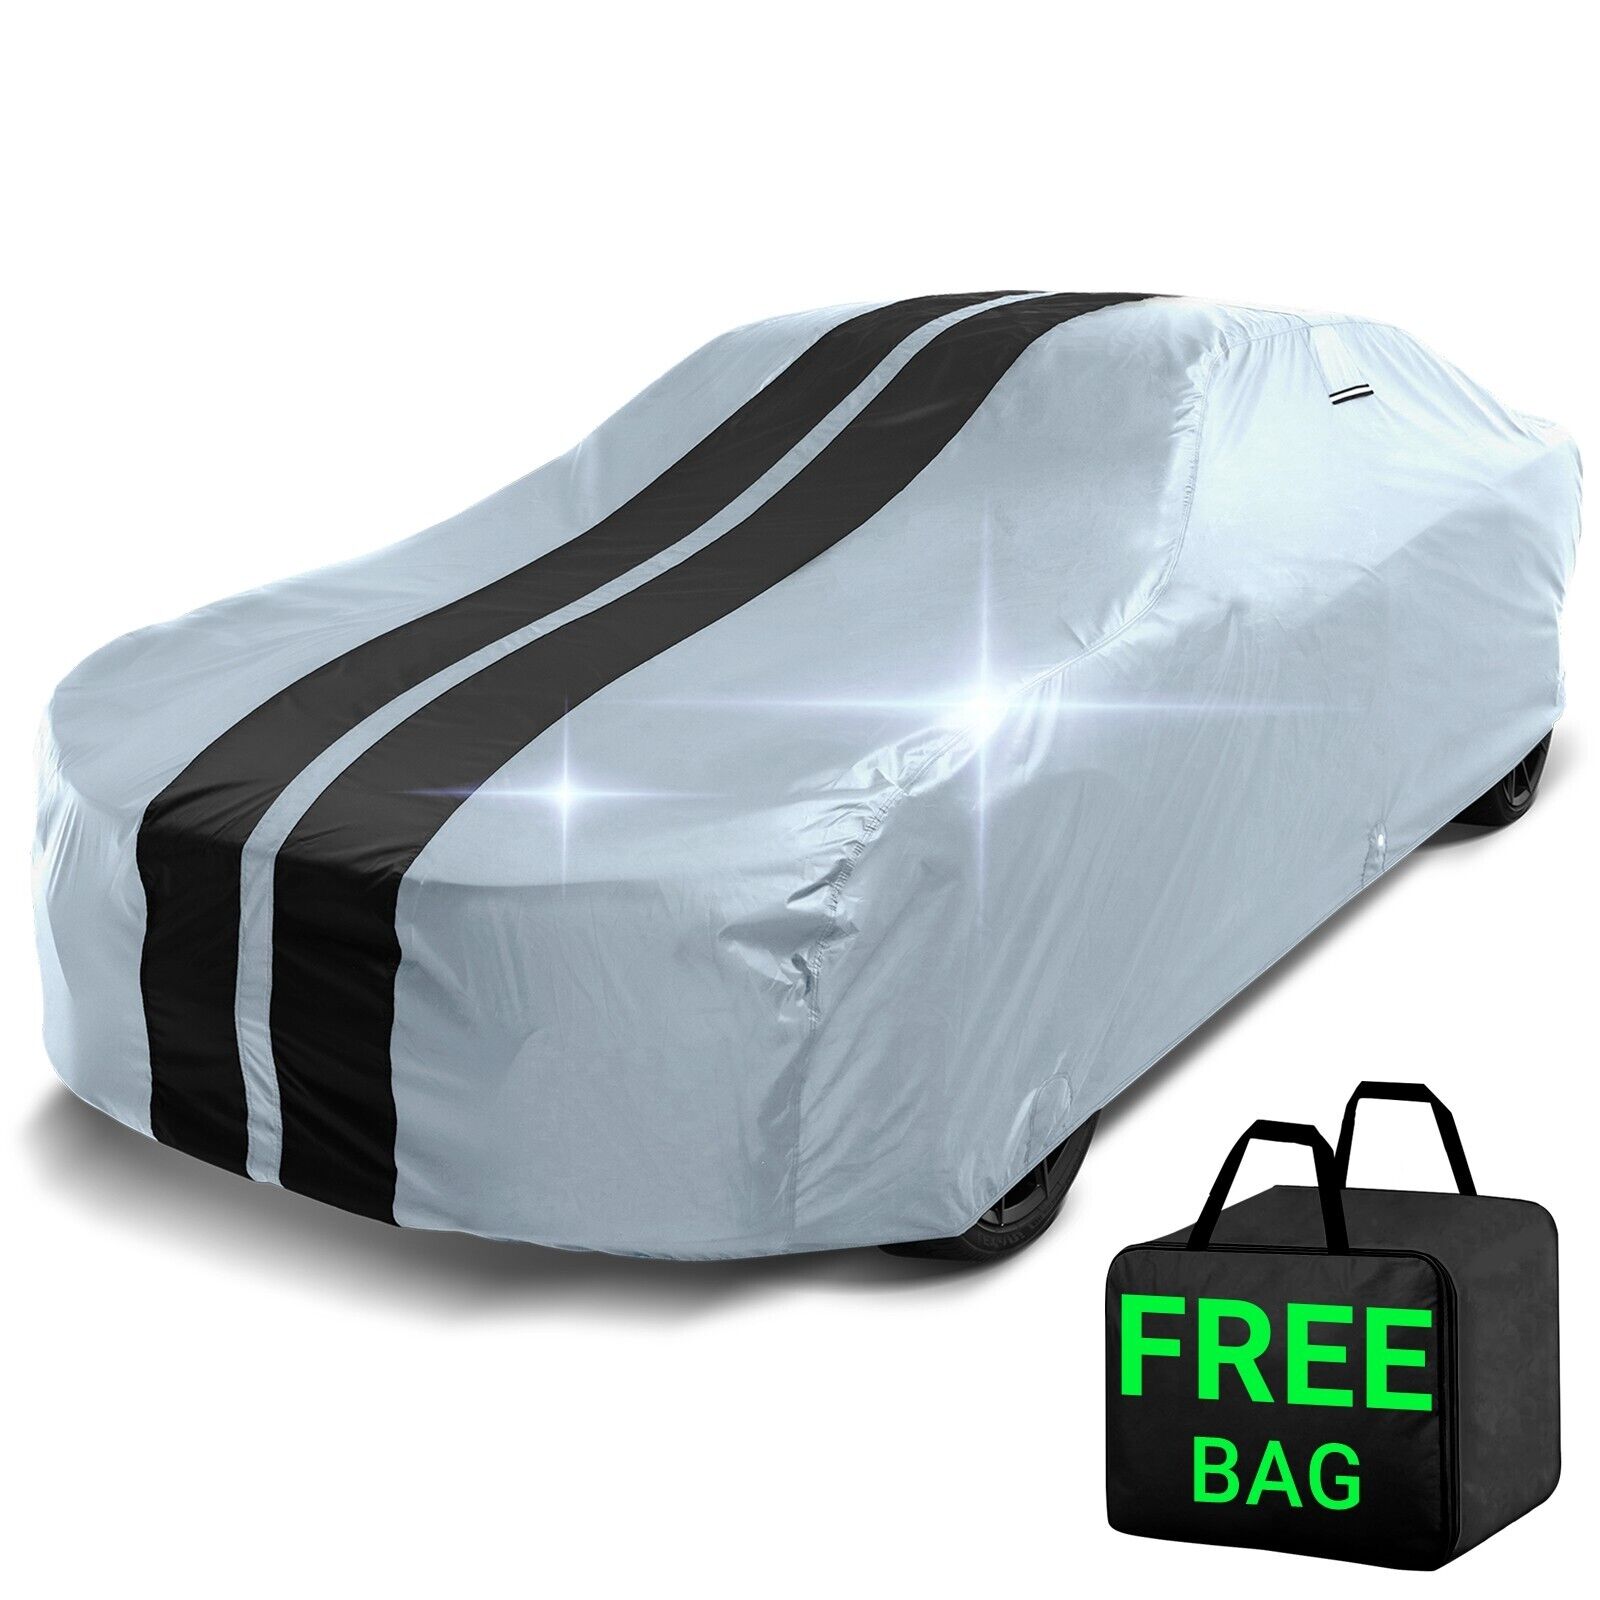 1971-1975 BMW 3.0CSL E9 Coupe Custom Car Cover - All-Weather Waterproof Outdoor